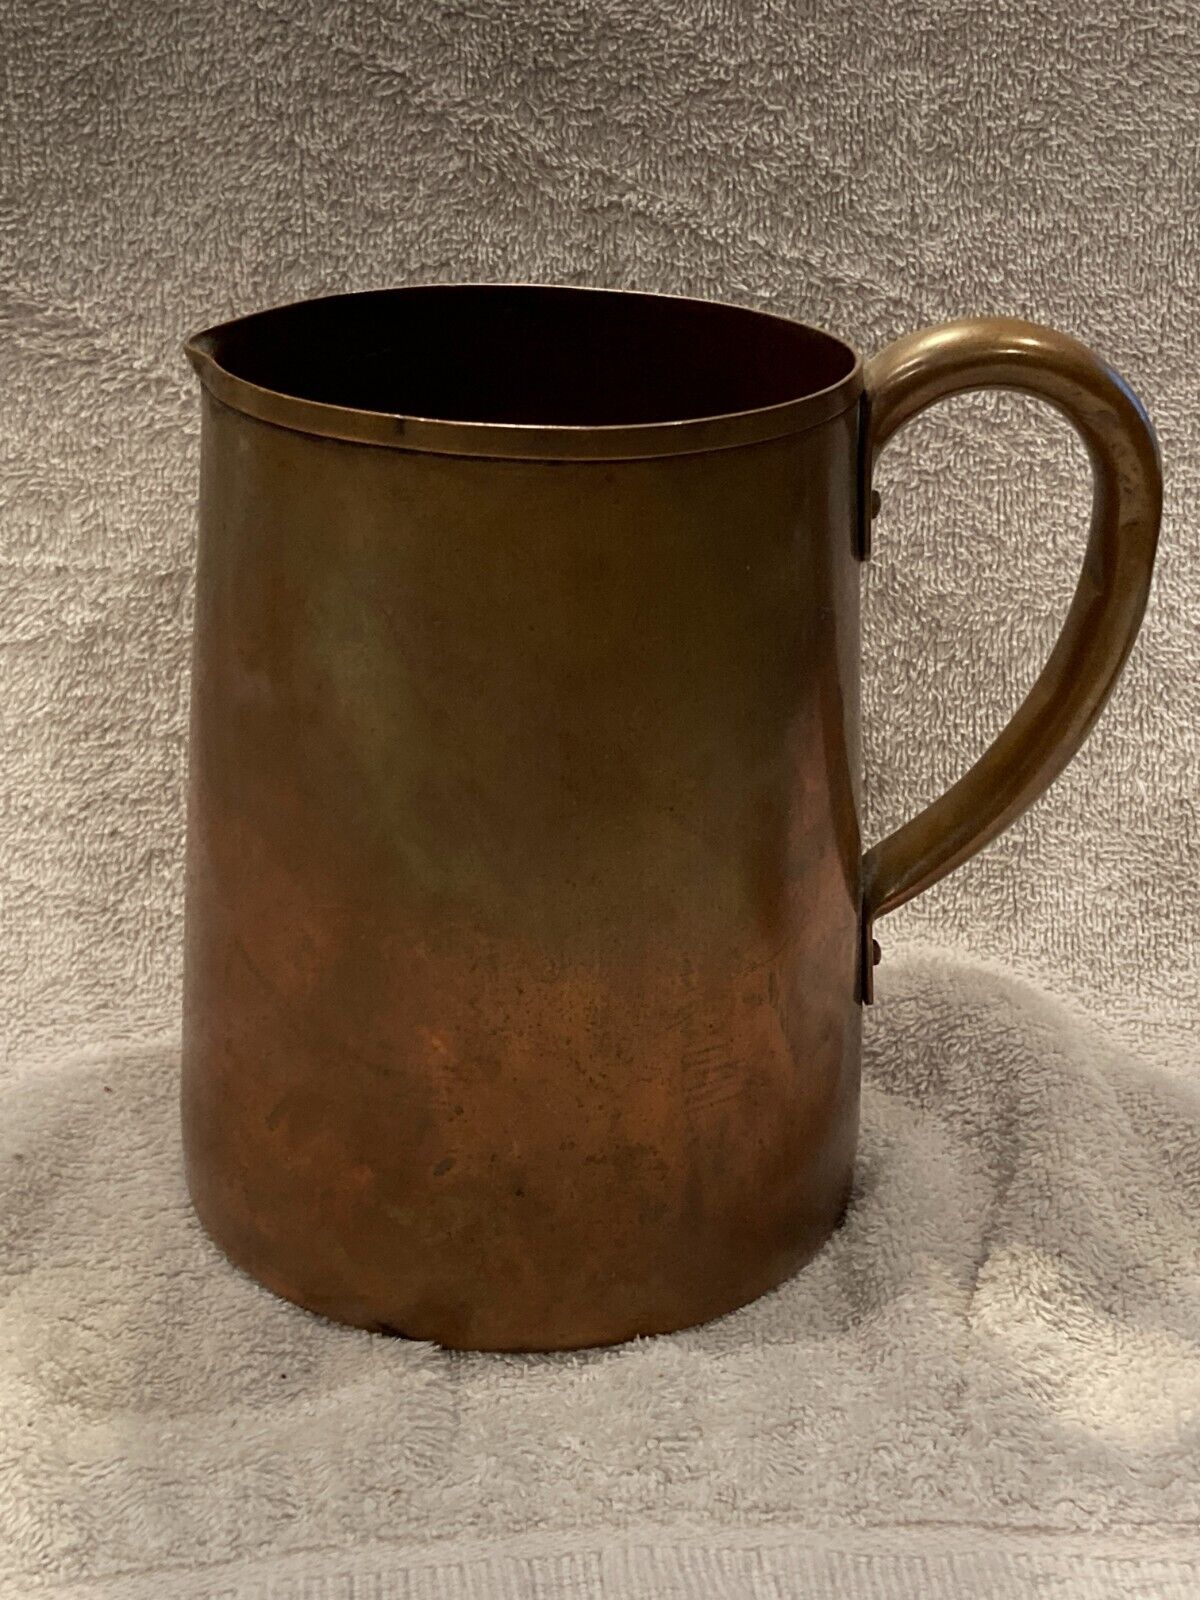 Antique Copper Pitcher with Beautiful Patina